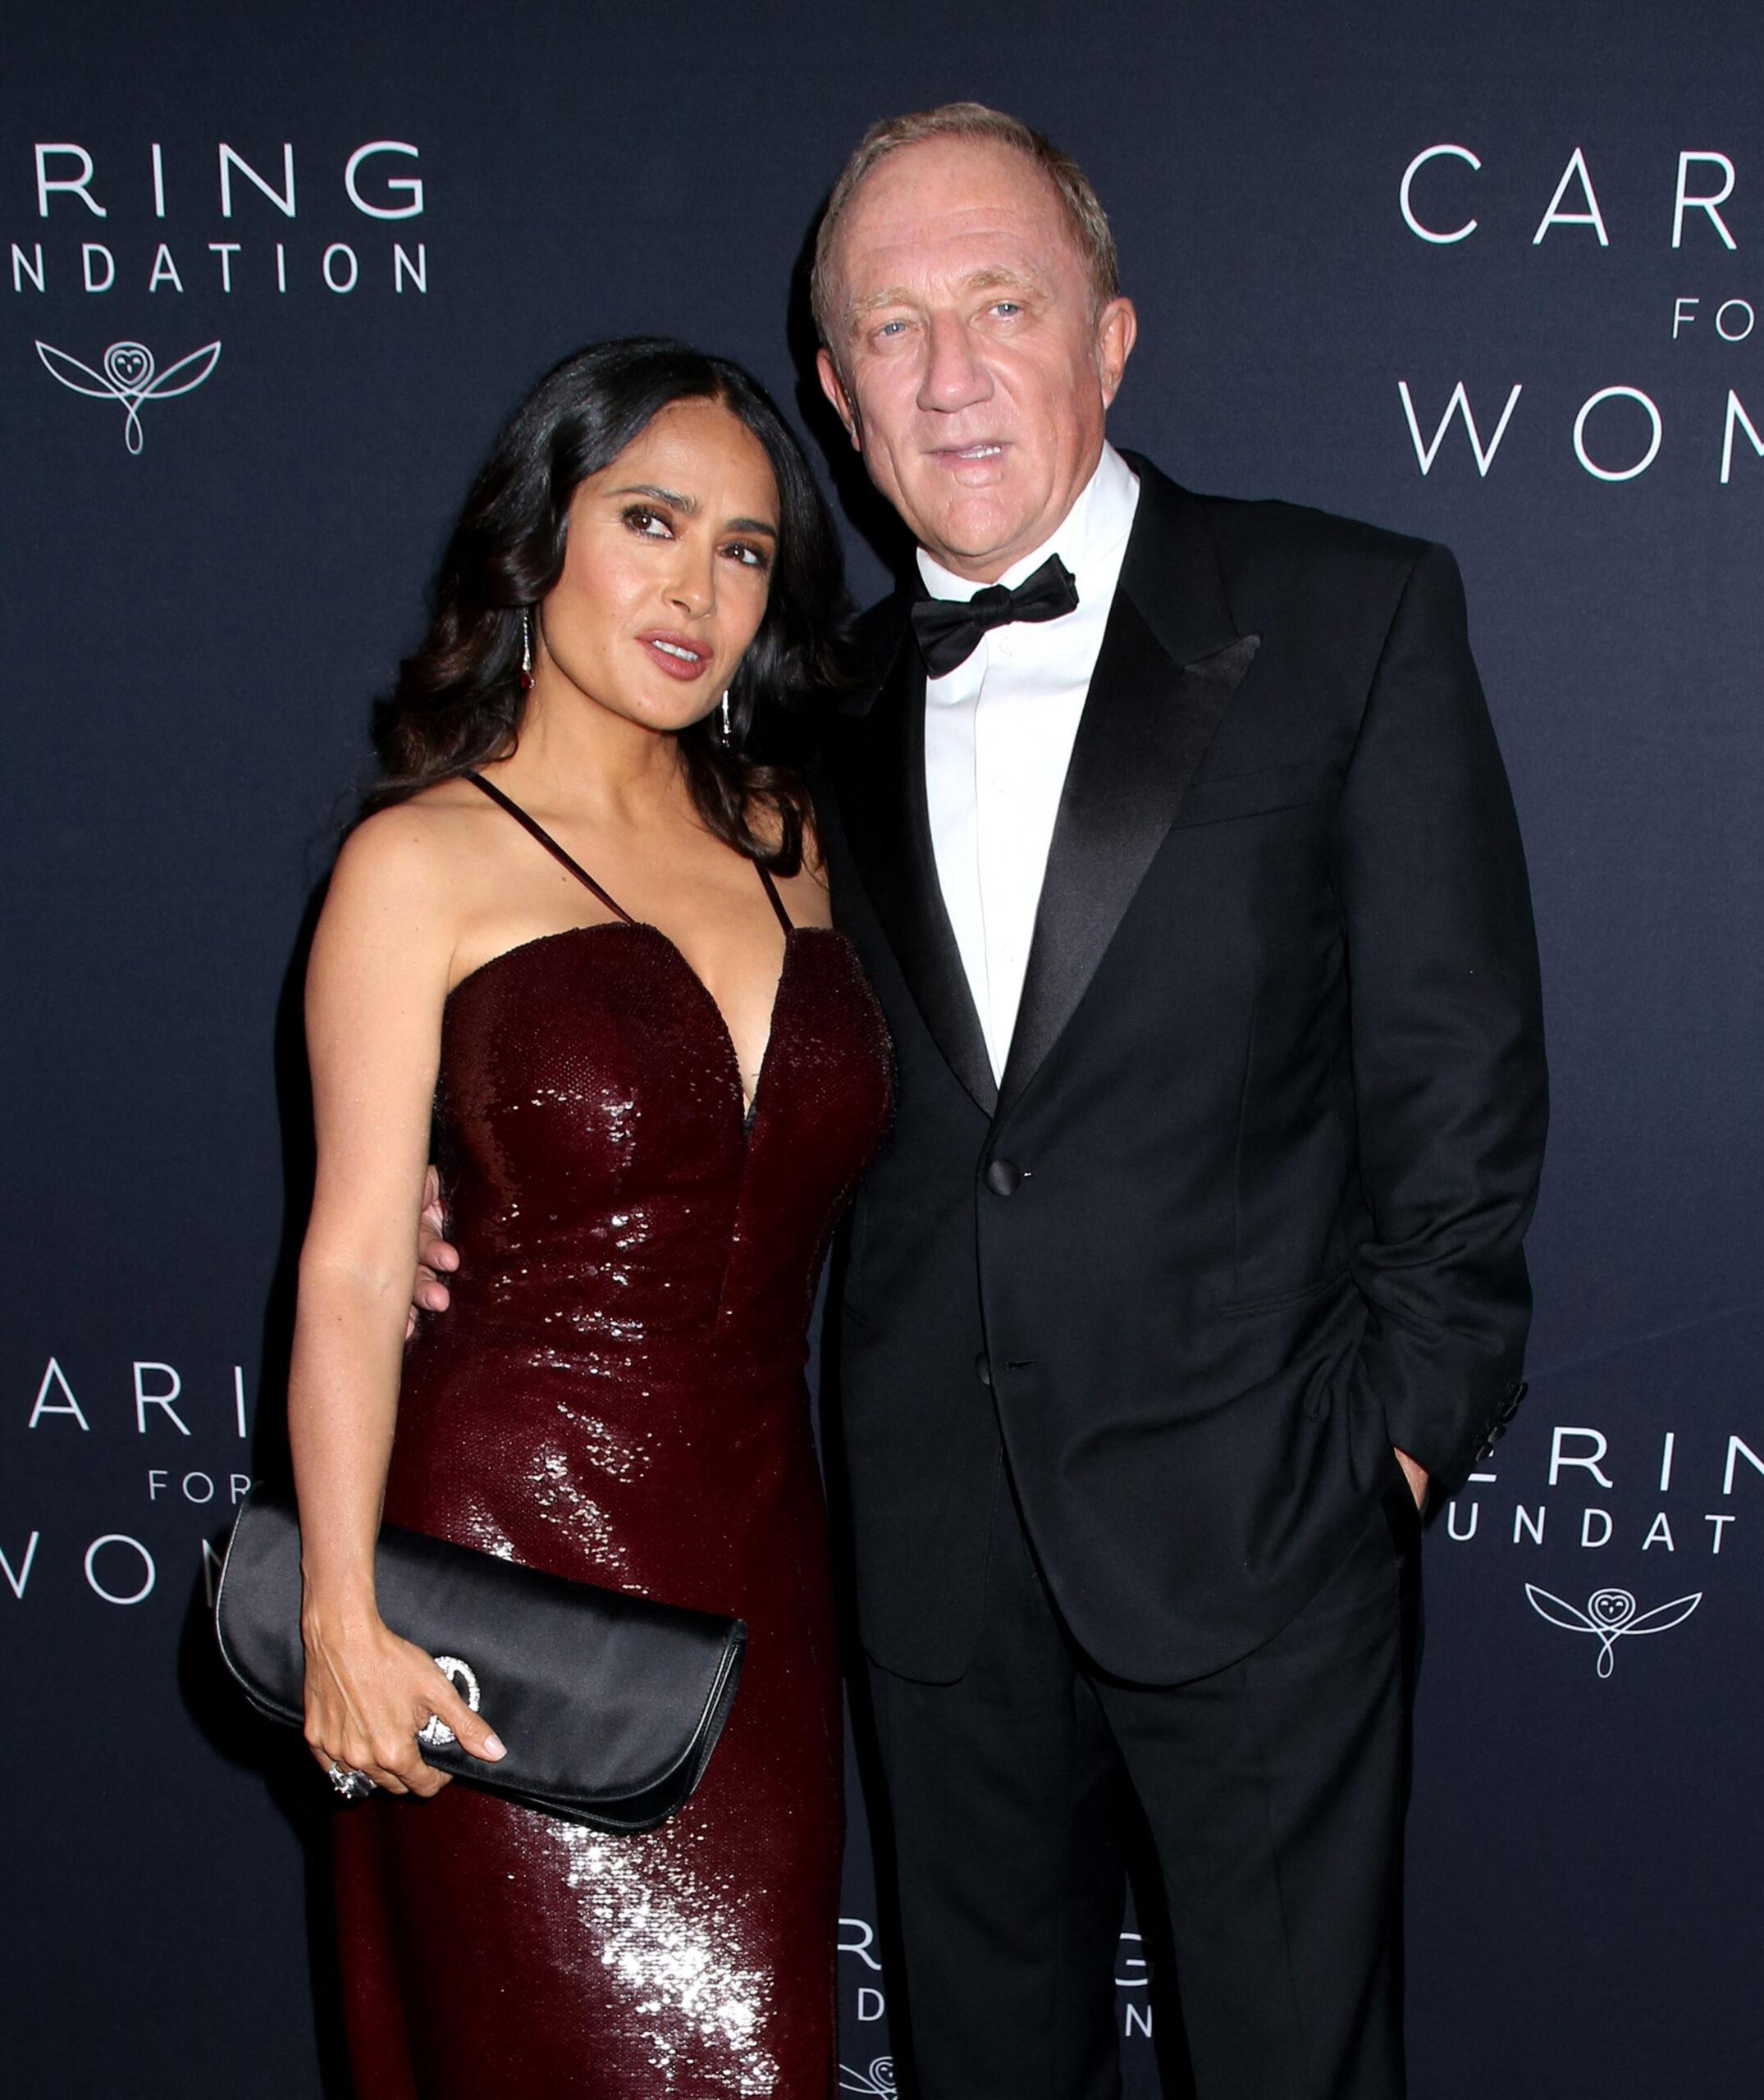 Salma Hayek and Francois-Henri Pinault at the Kering Foundation's 2nd Annual Caring for Women dinner